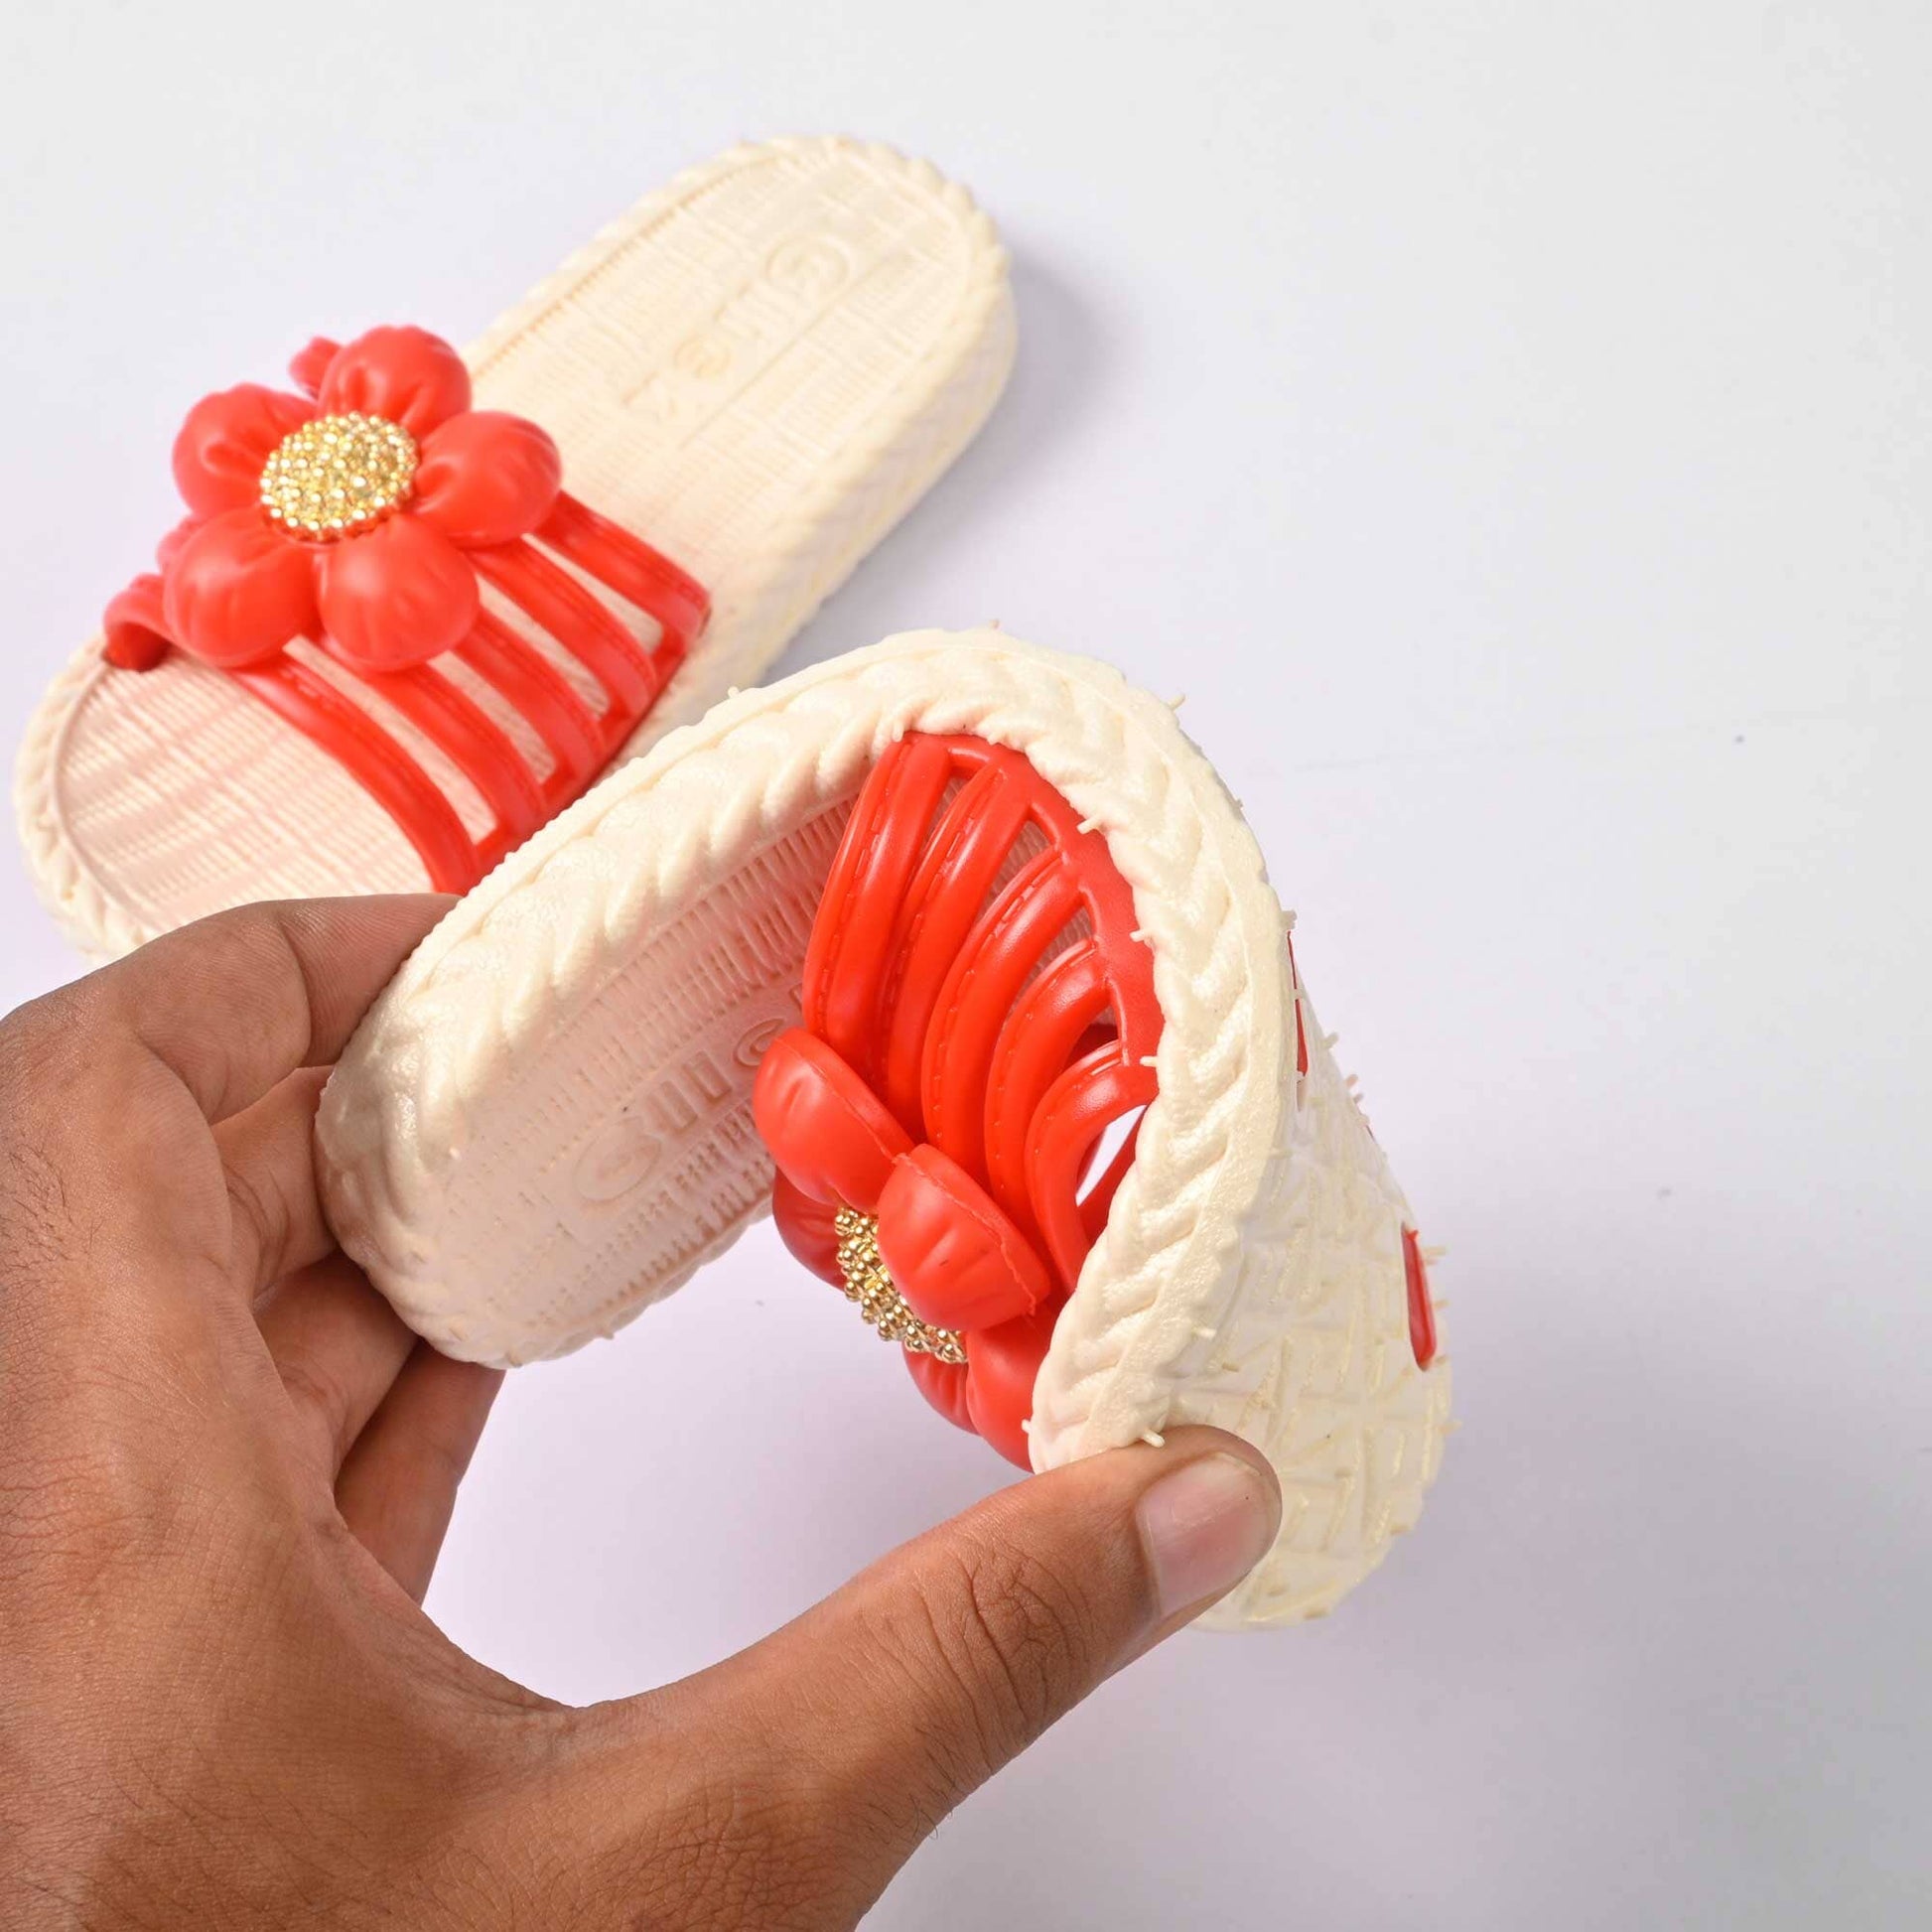 Click Kid's Strappy Flower Design Slippers Girl's Shoes RAM 